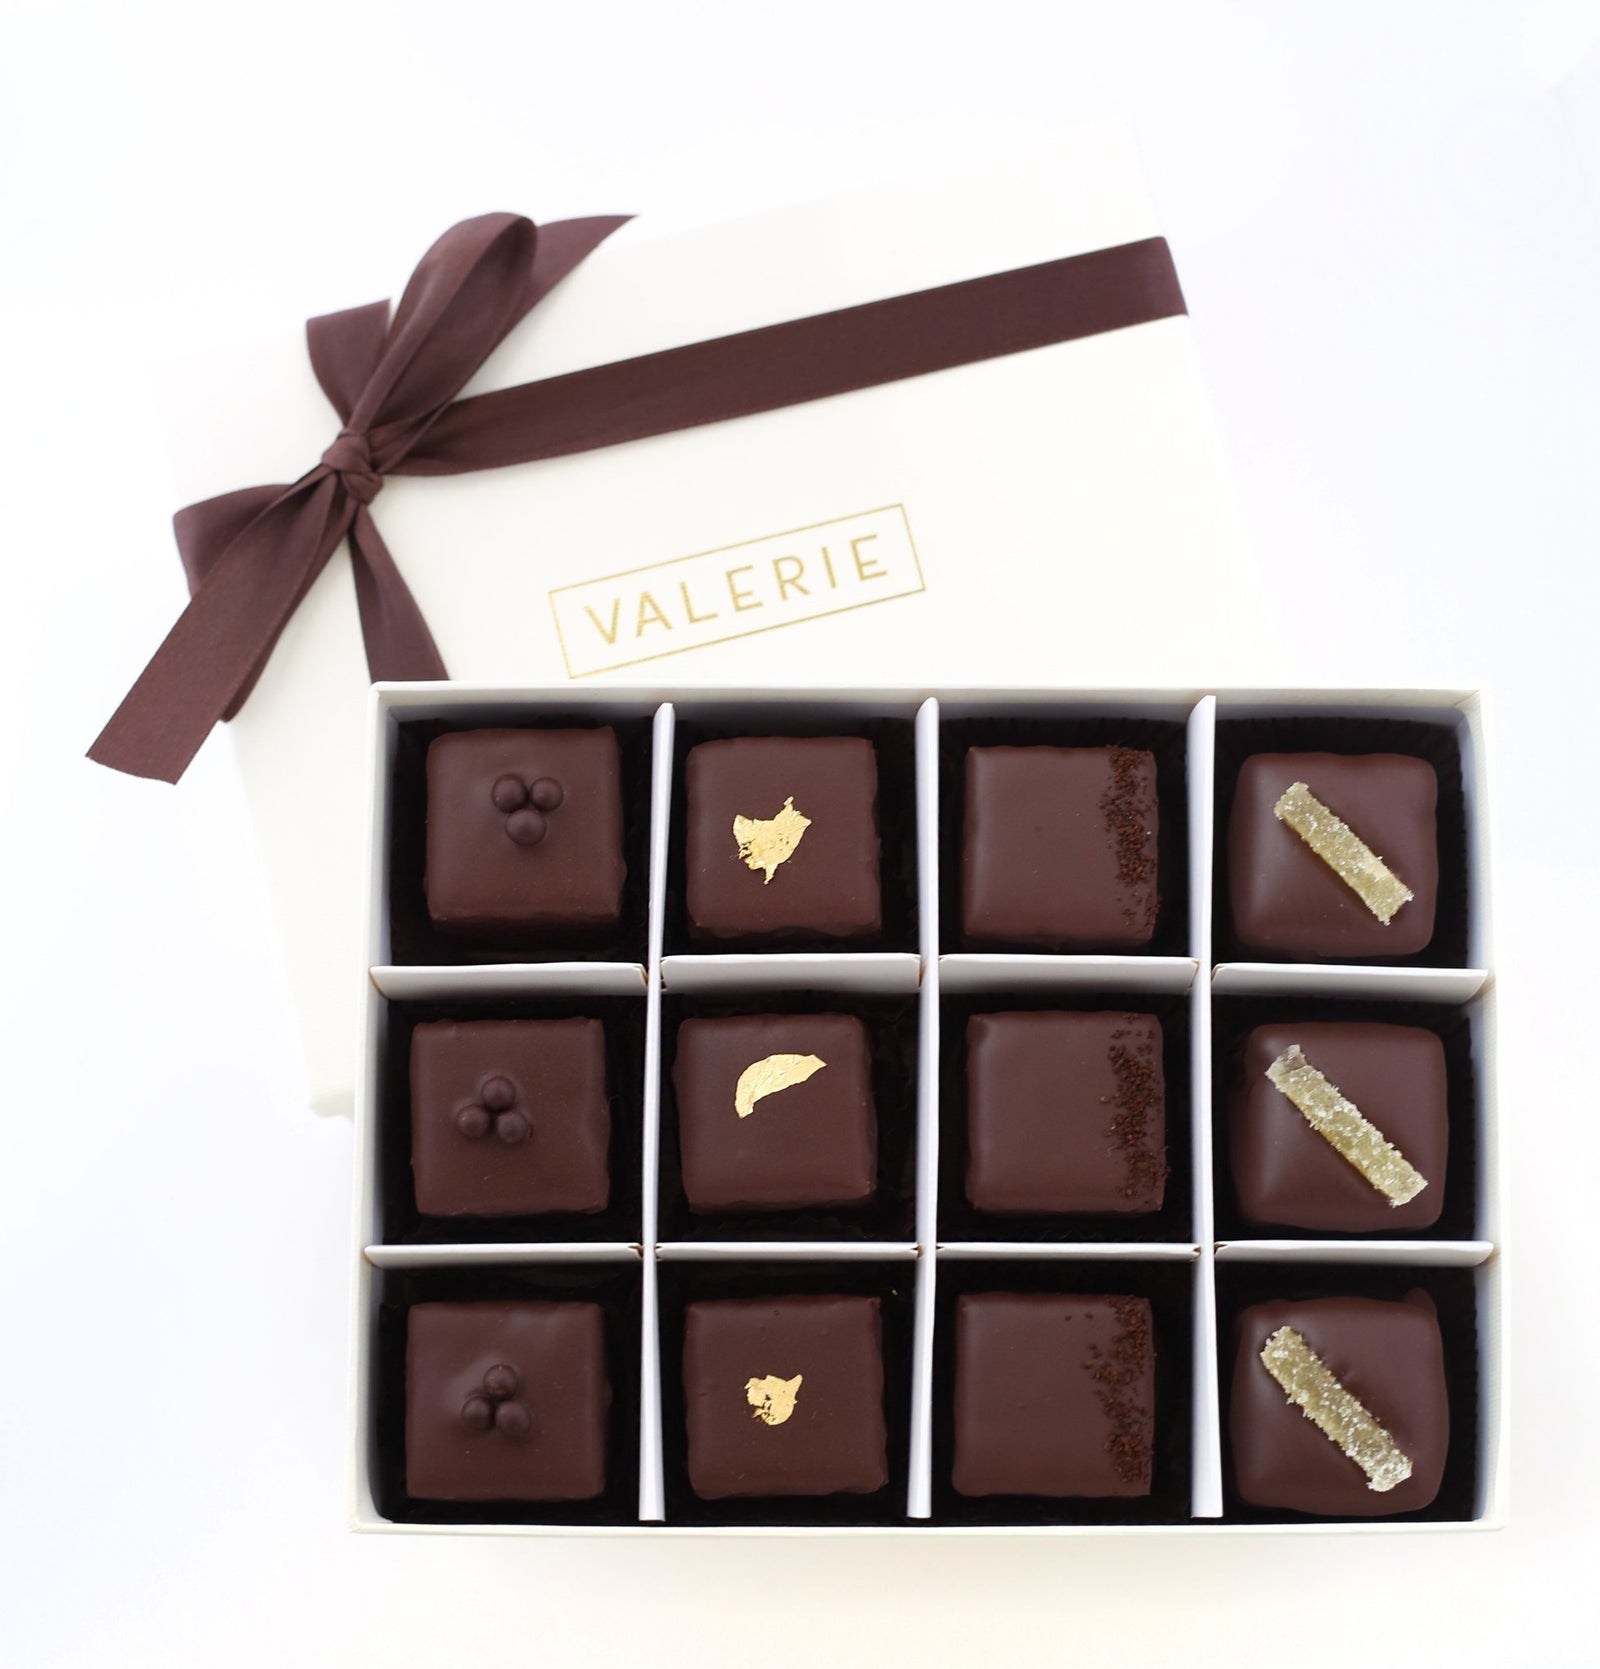 A box containing twelve chocolate-covered petits fours, some garnished with gold leaf, chocolate balls, espresso grounds, or candied ginger, with "VALERIE" branding on the lid.